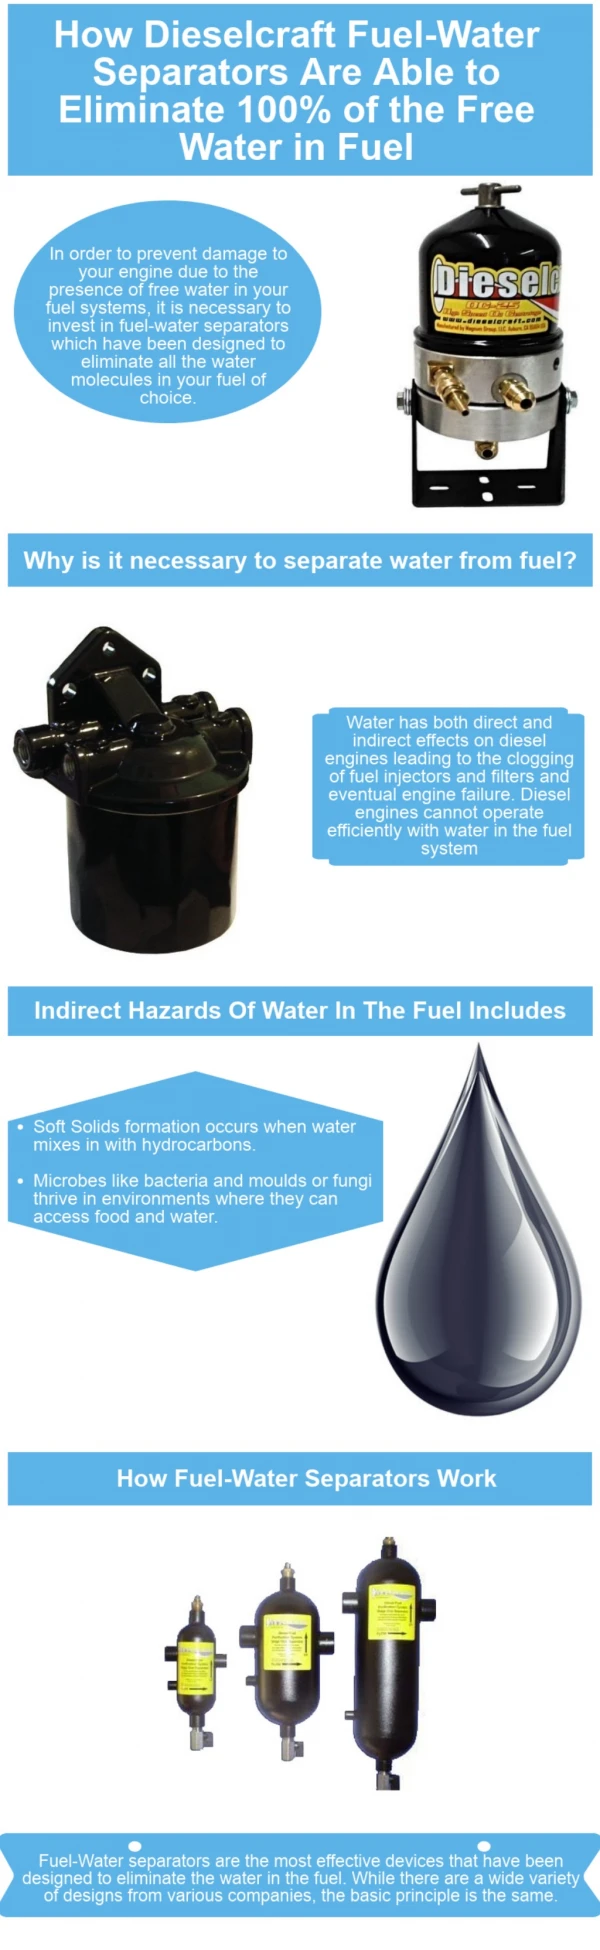 How Dieselcraft Fuel-Water Separators Are Able to Eliminate 100% of the Free Water in Fuel